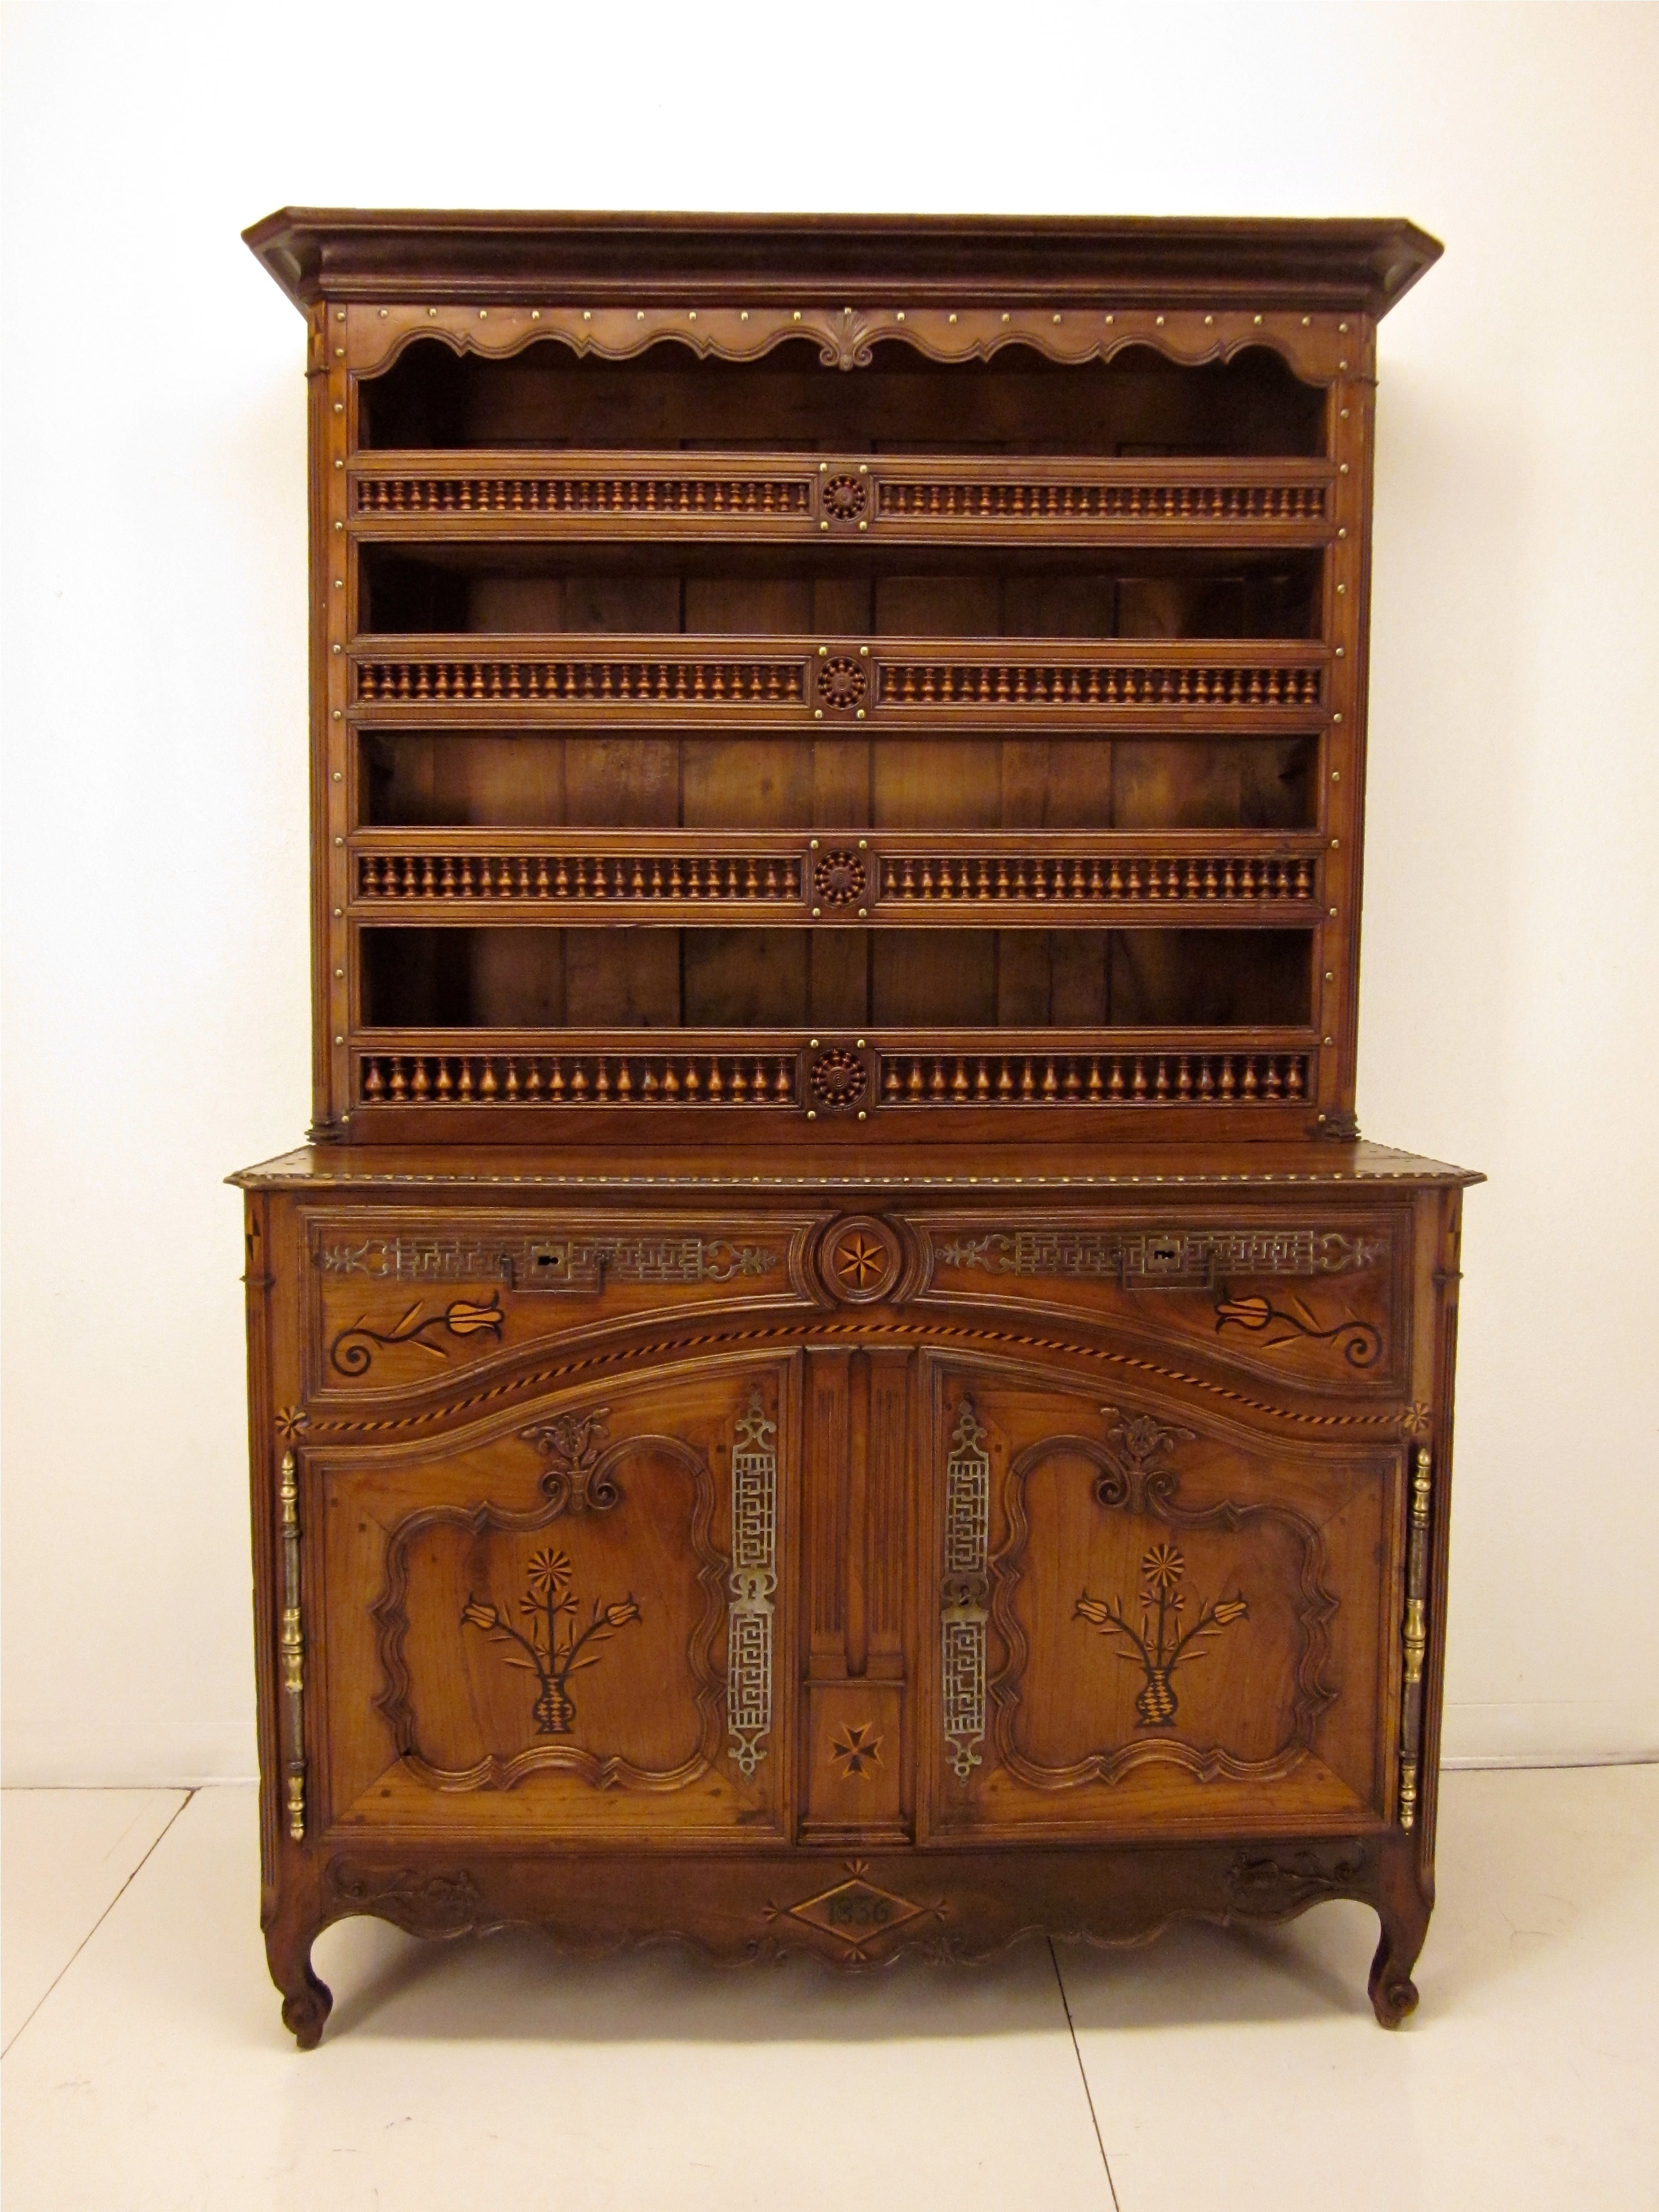 19th c. French Brittany Buffet Vaisellier or Hutch, Dated 1832